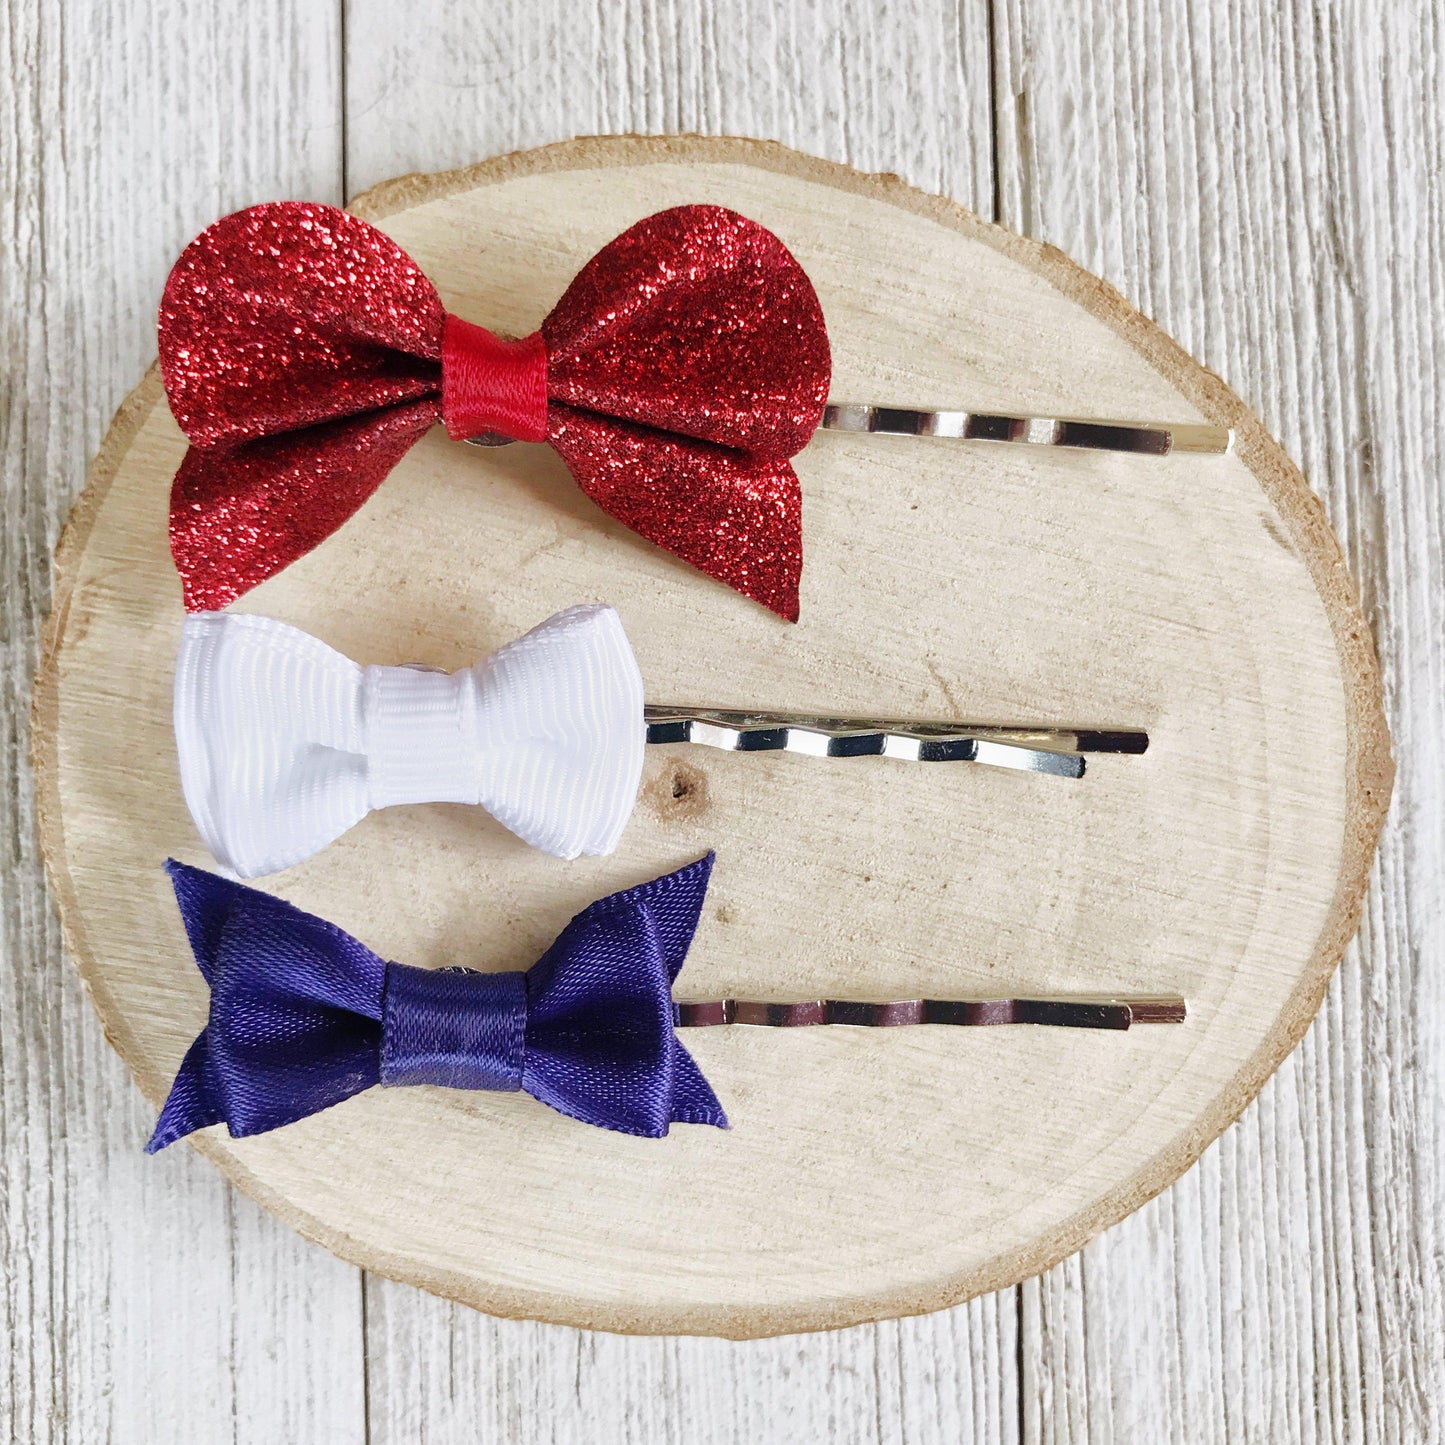 Set of 3 Patriotic Bow Hair Pins: Red, White & Blue Hair Accessories